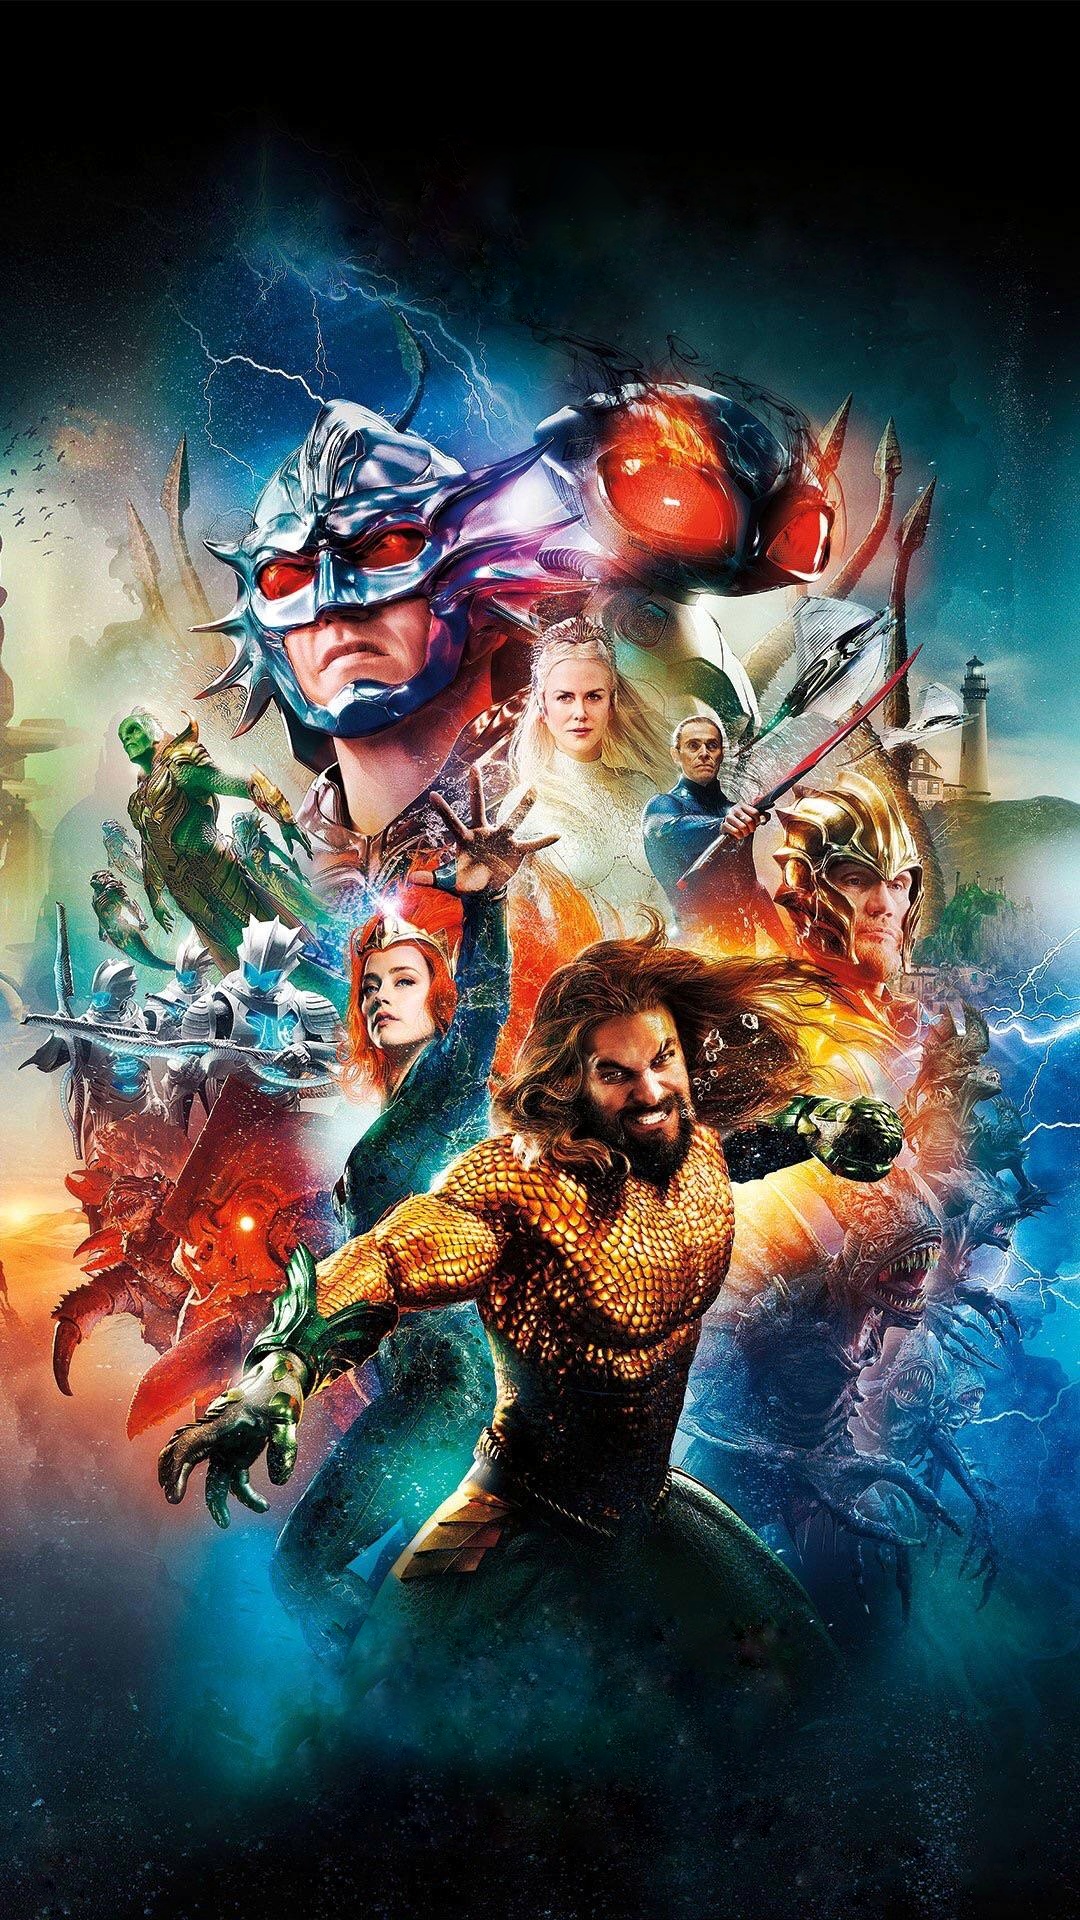 Aquaman 2018 Movie Fan Poster Wallpapers